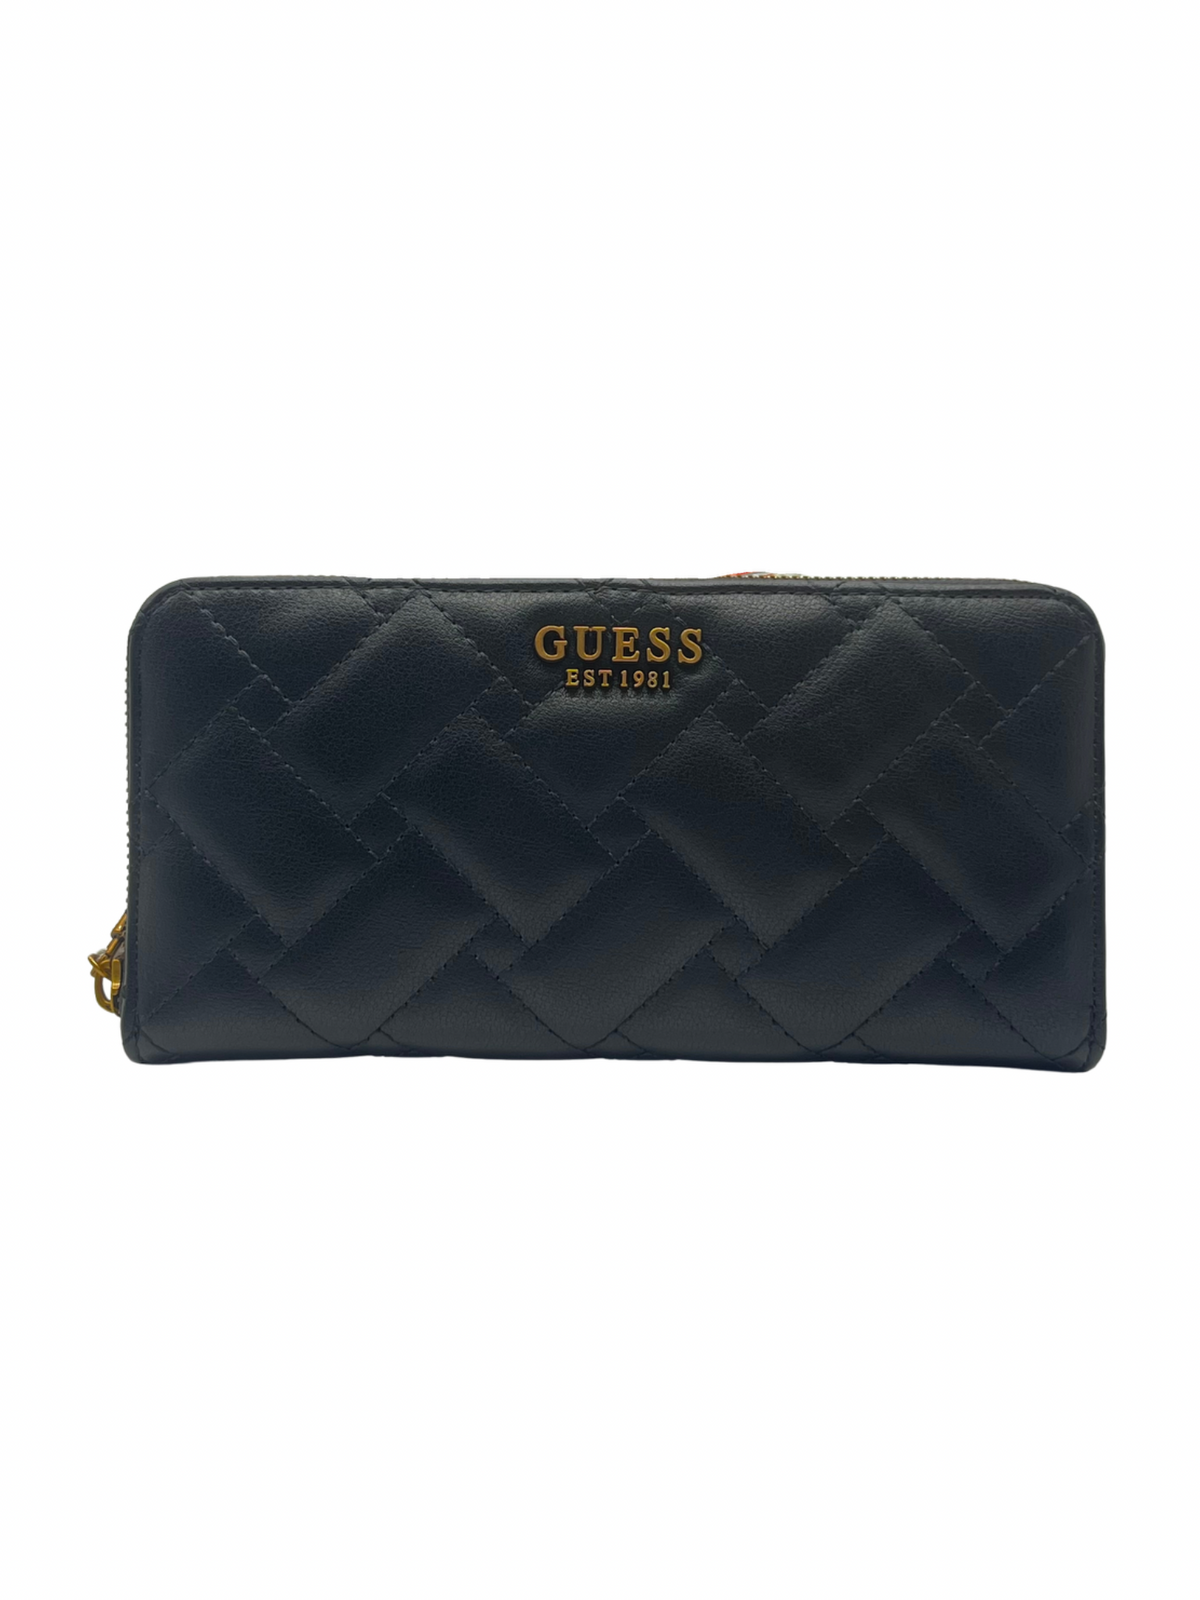 Guess Black Purse With Rectangle Design